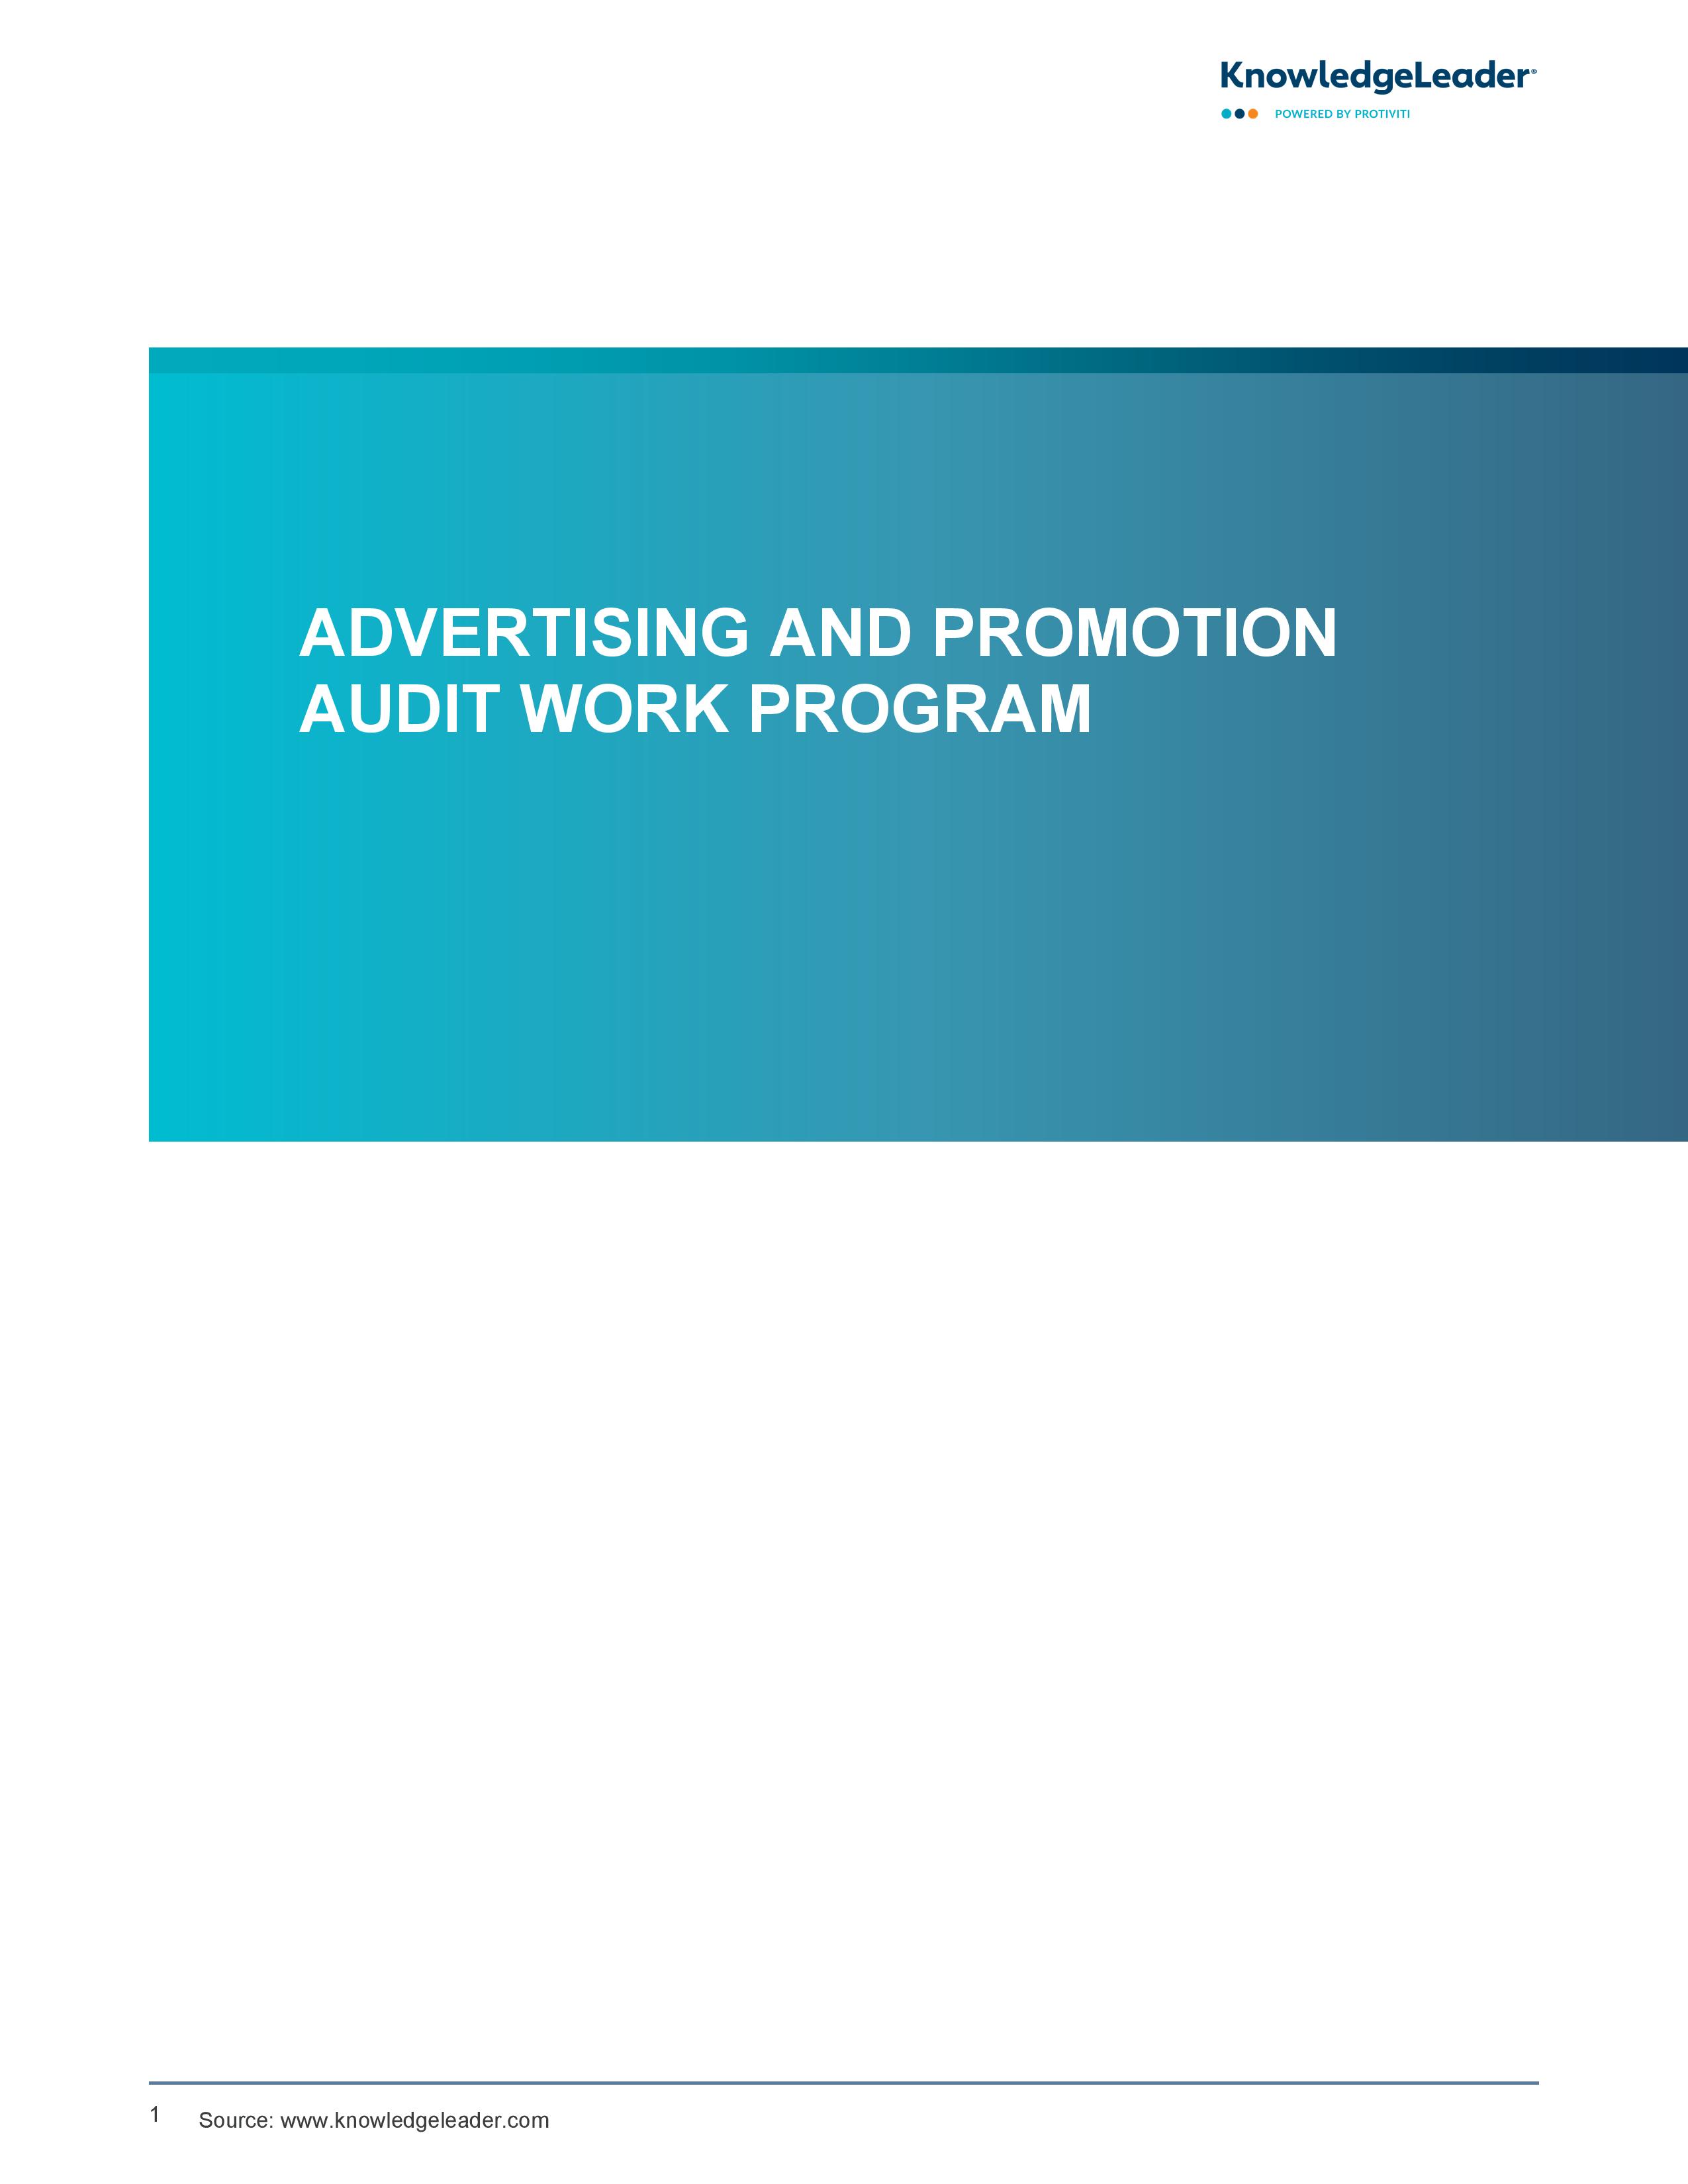 Screenshot of the first page of Advertising and Promotion Work Program